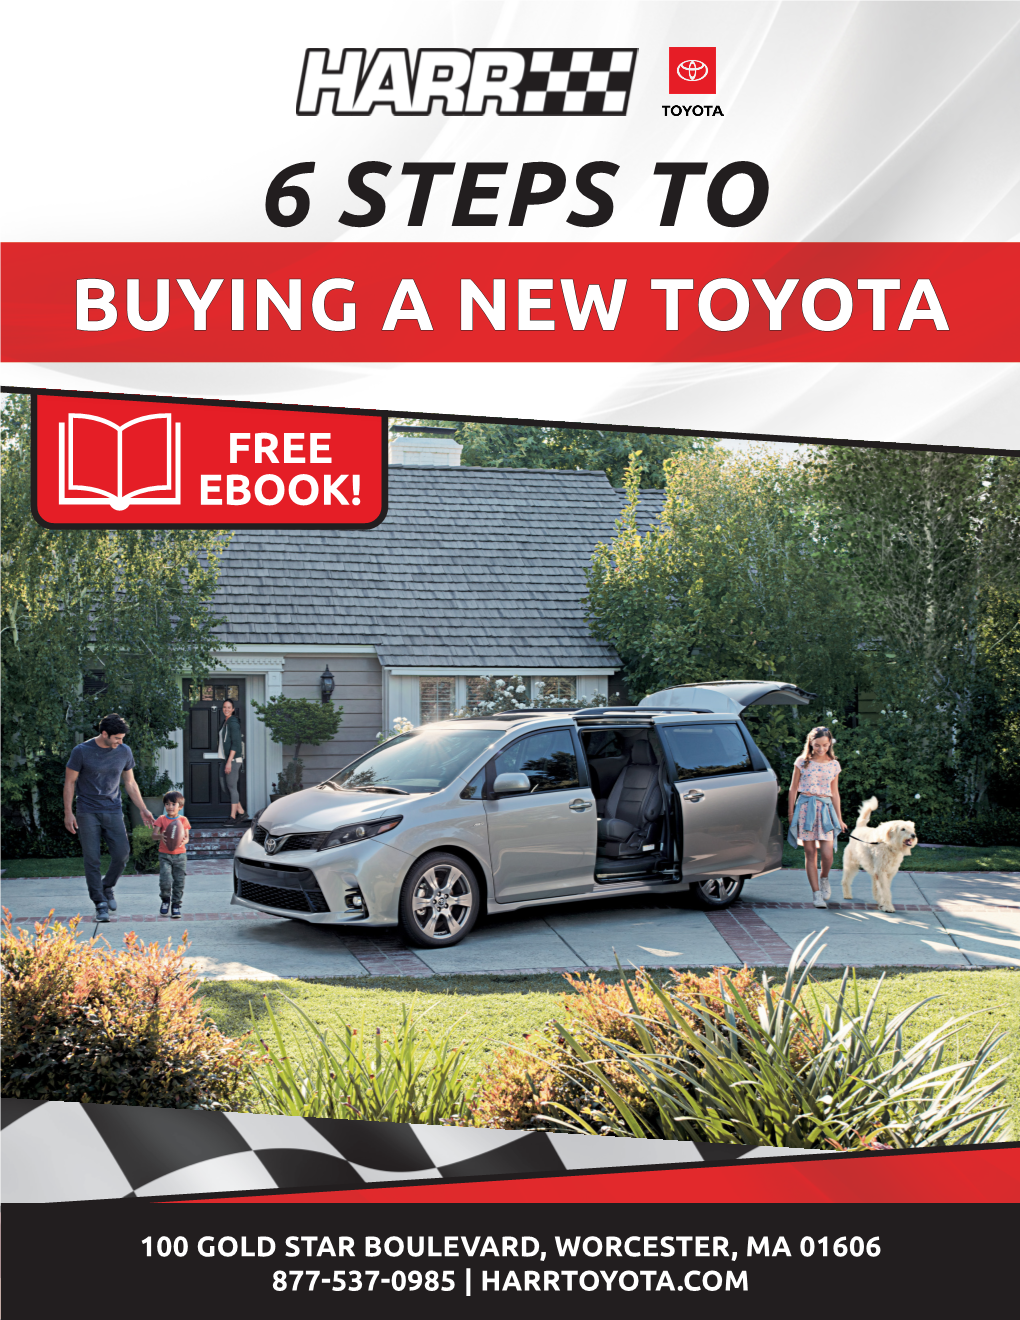 6 Steps to Buying a New Toyota